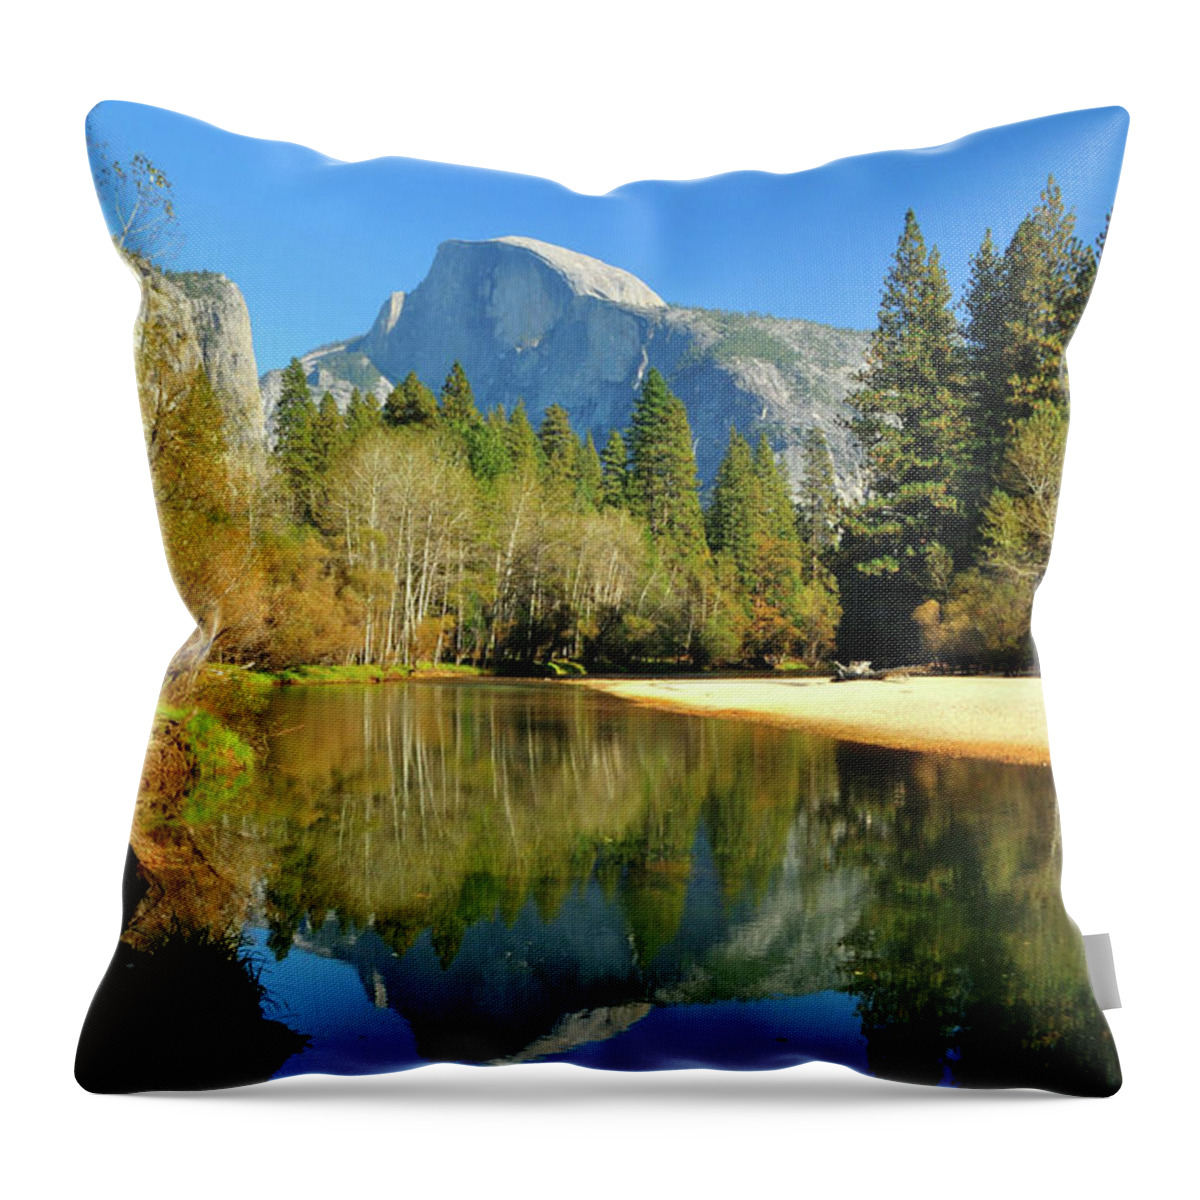 Scenics Throw Pillow featuring the photograph Reflections Of Half Dome by Sandy L. Kirkner